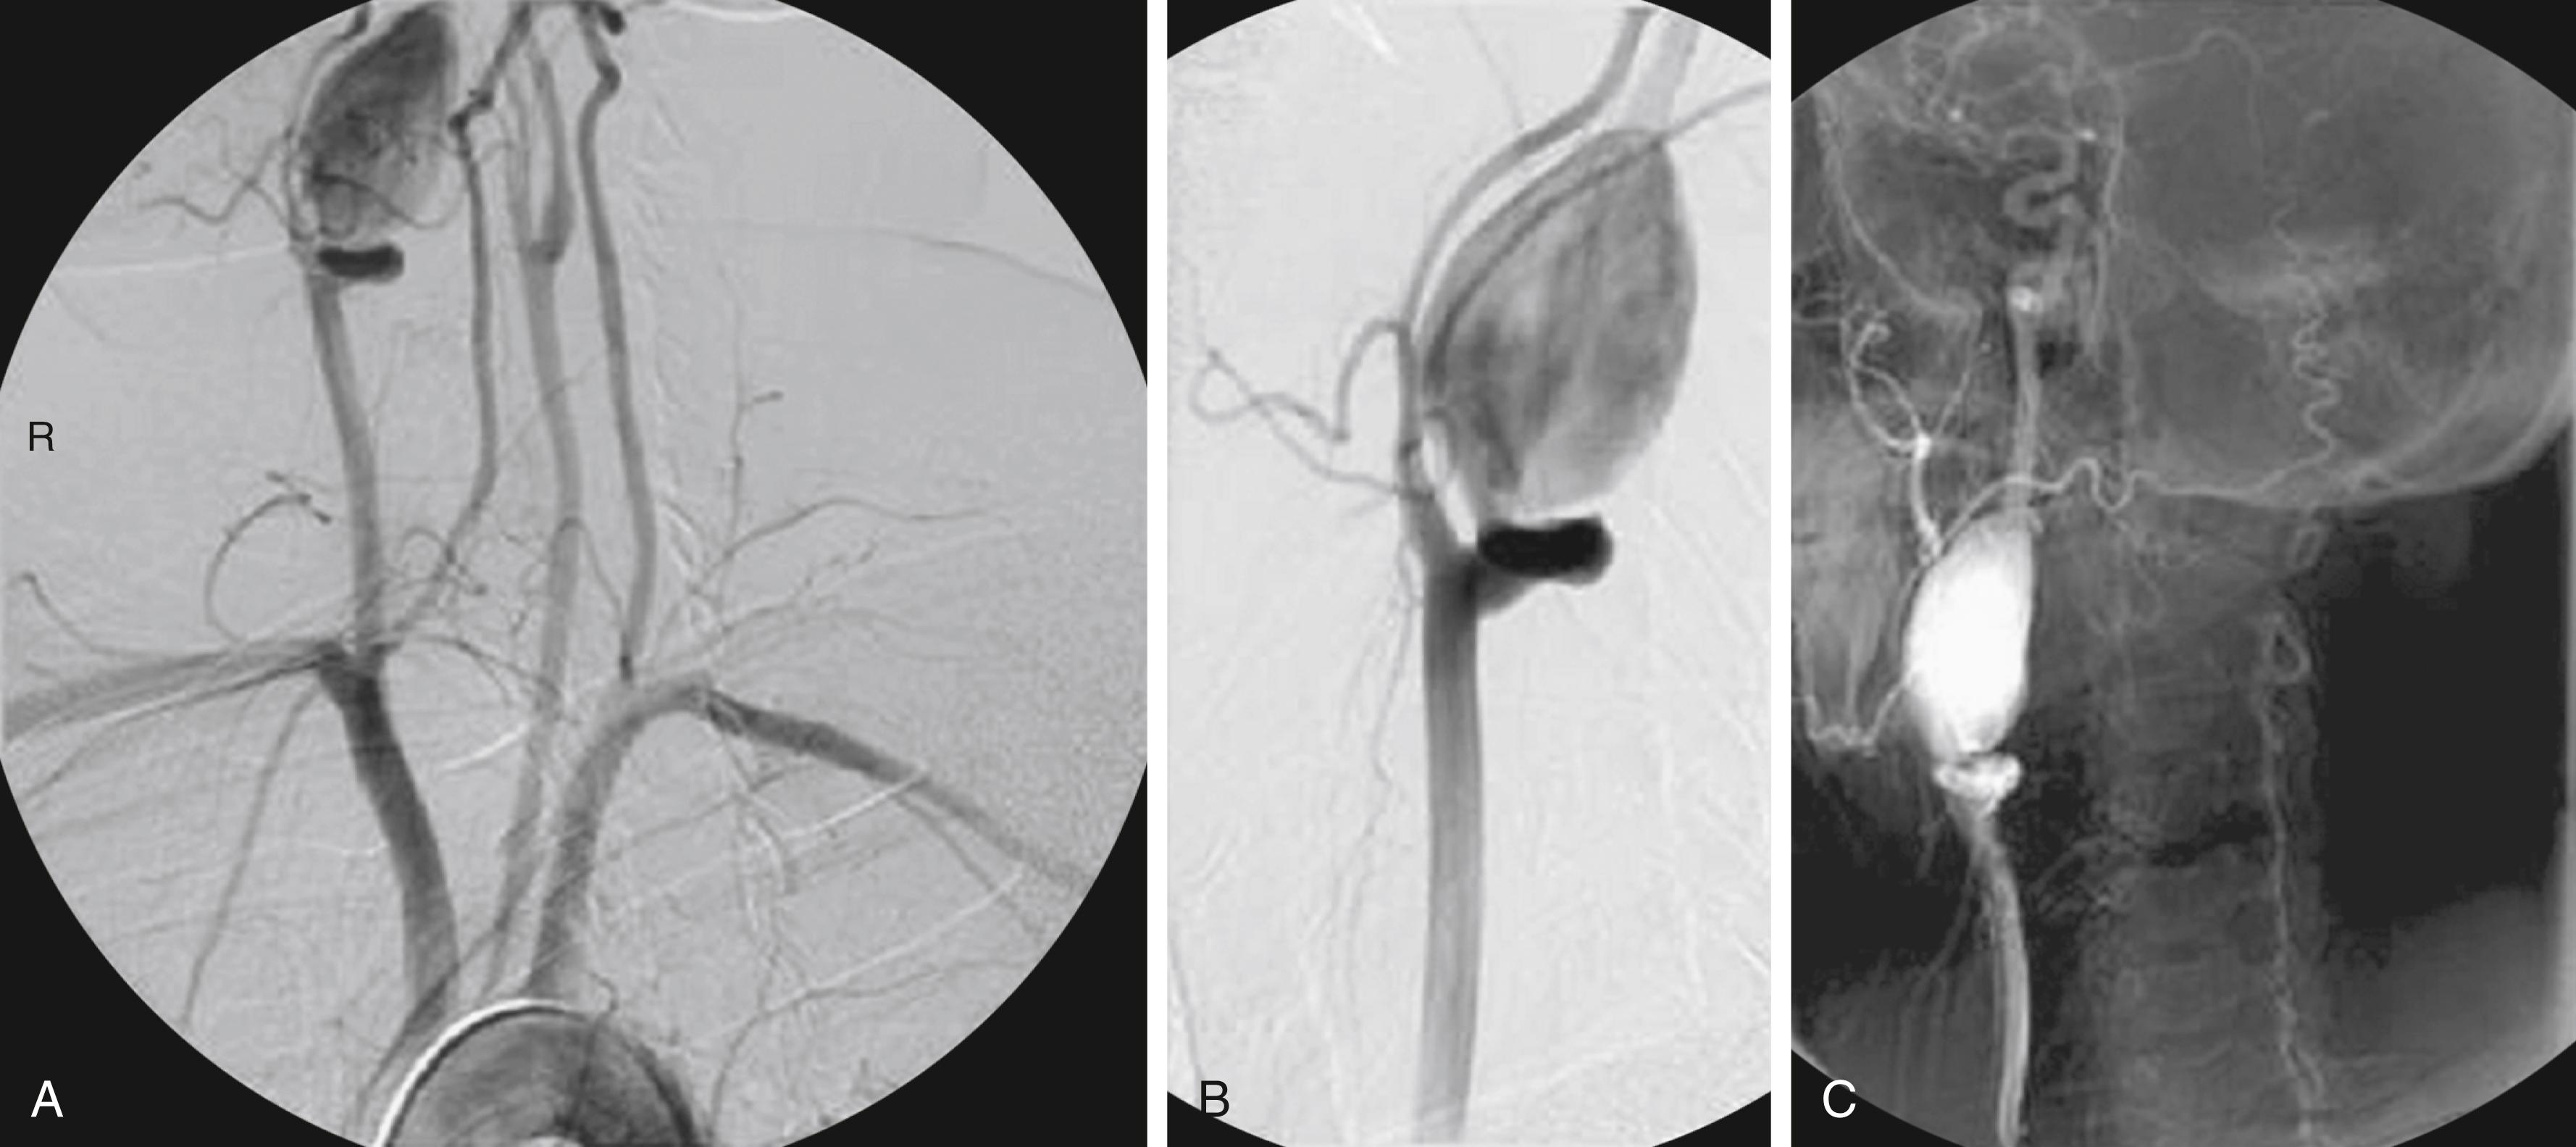 Figure 97.1, Arch ( A ) and right carotid ( B , C ) arteriograms showing a large extracranial carotid artery aneurysm involving the proximal internal carotid artery.